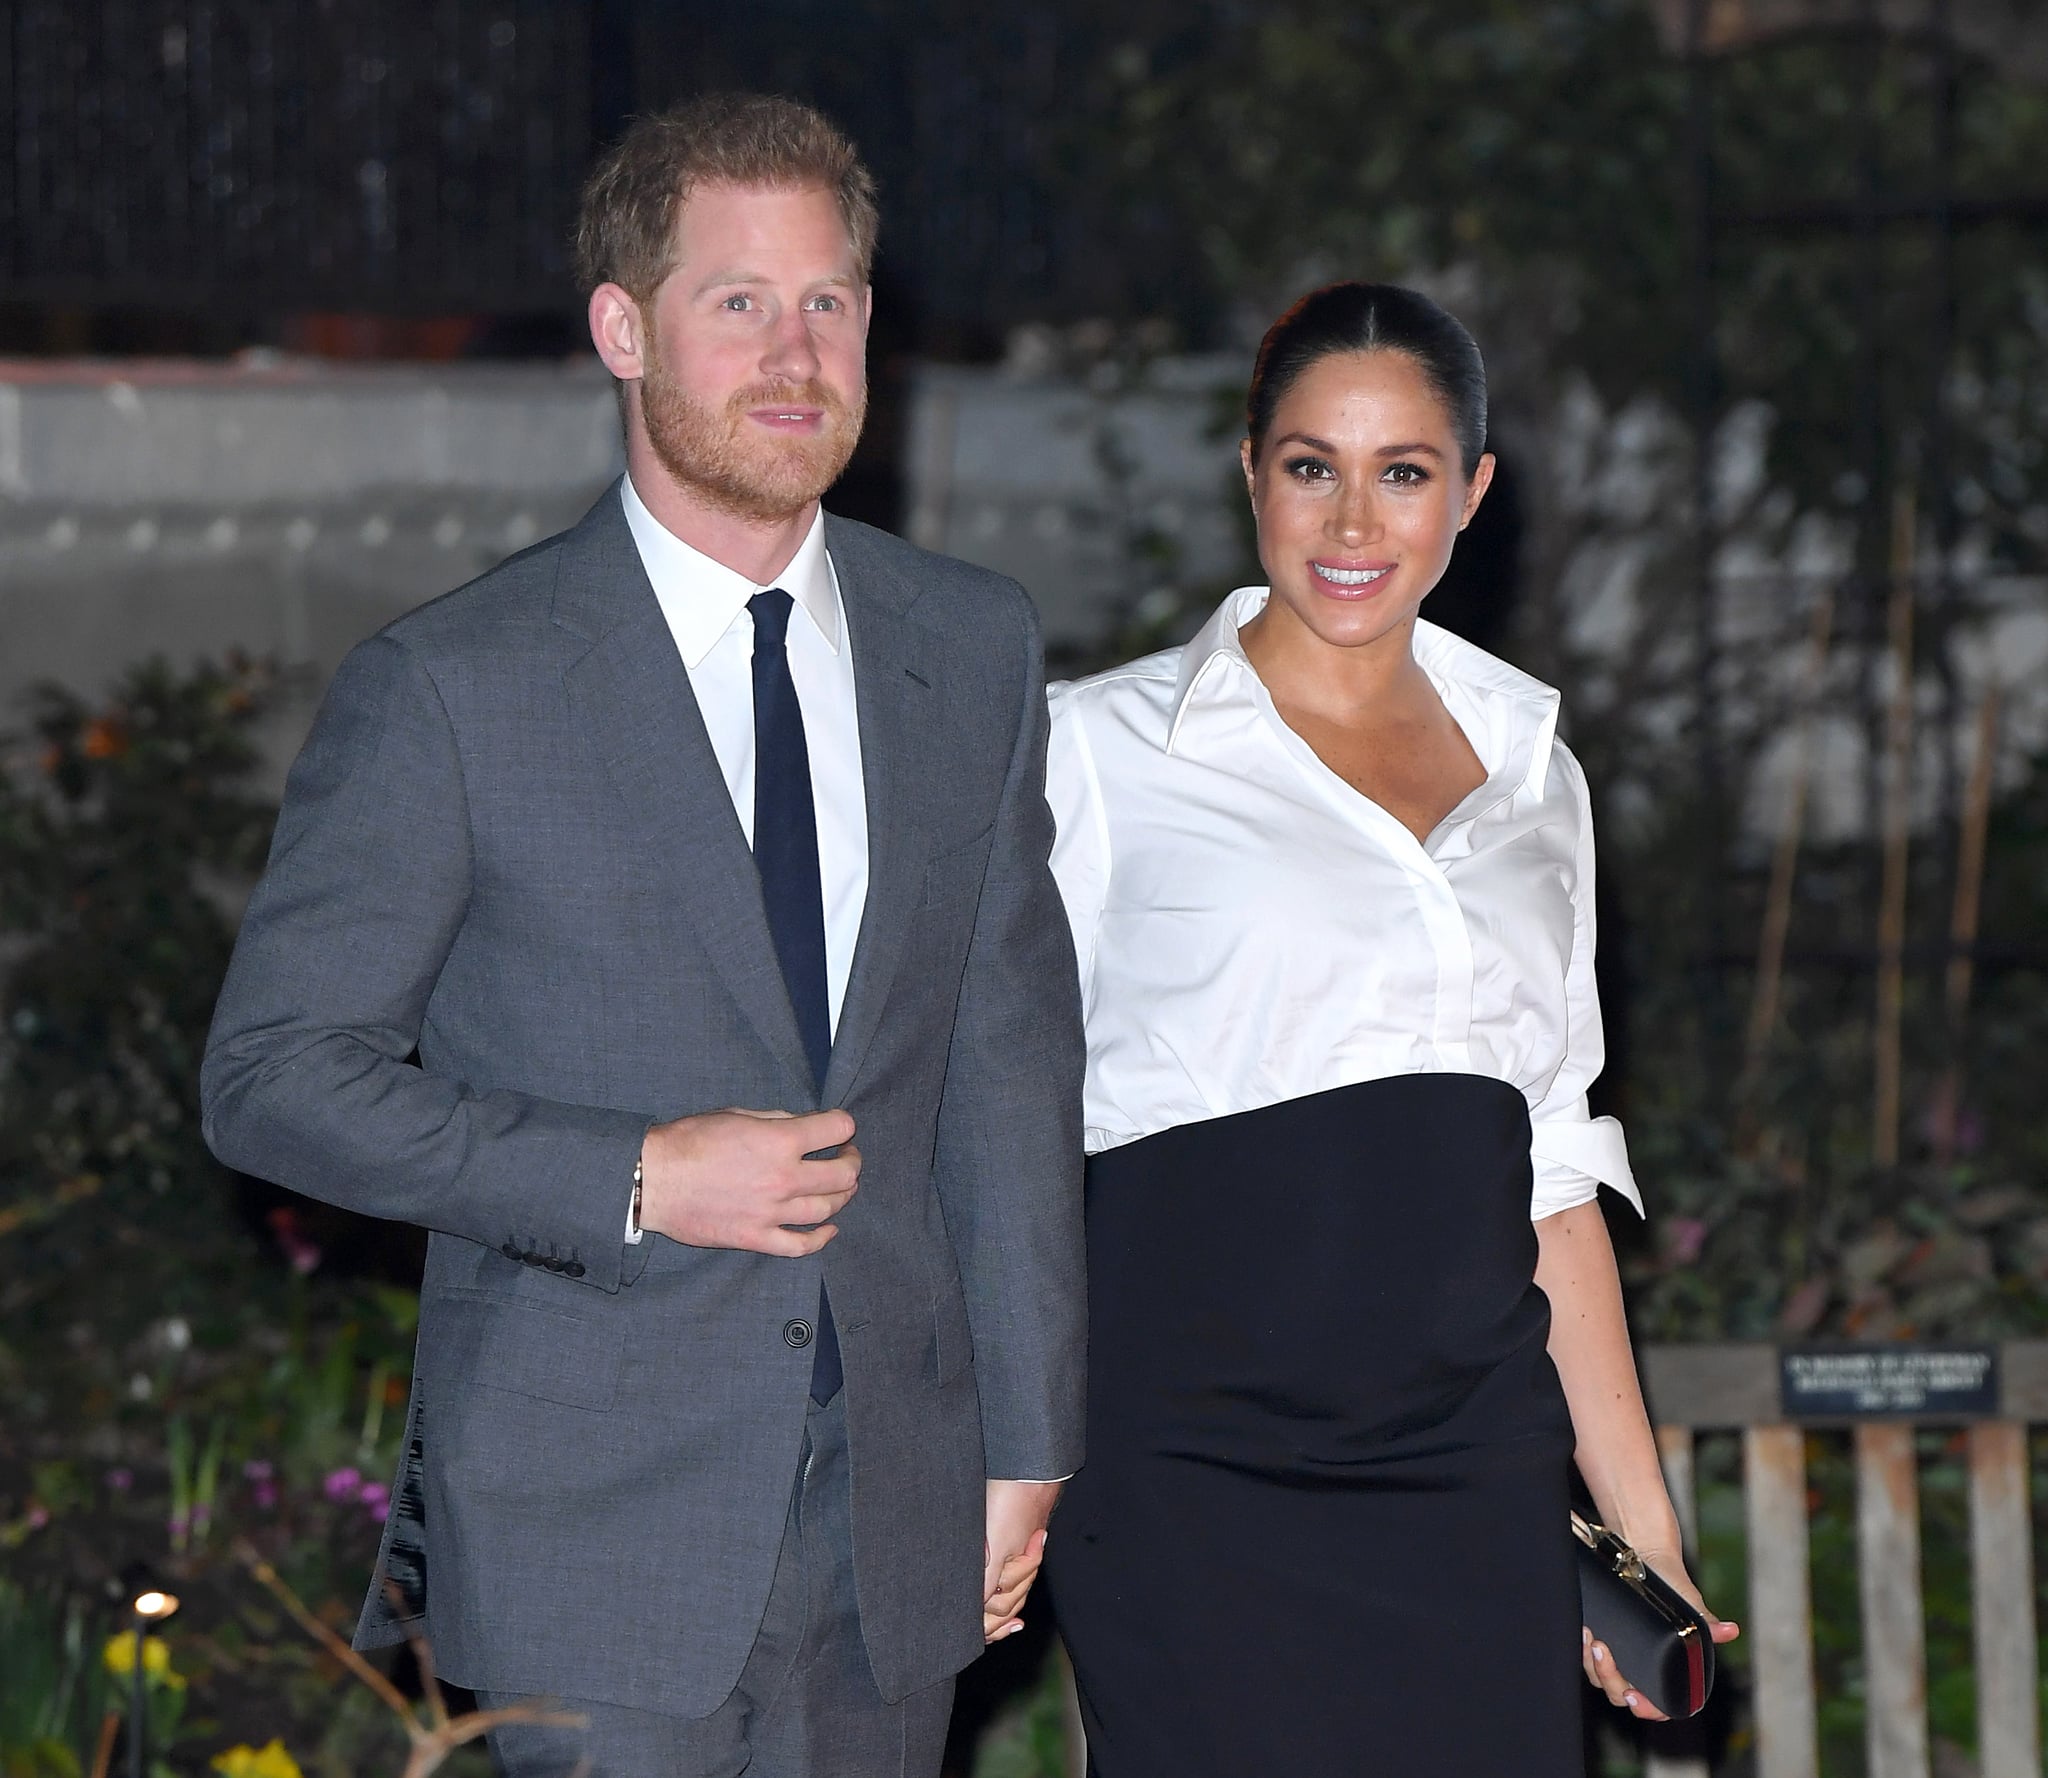 LONDON, ENGLAND - FEBRUARY 07: Prince Harry, Duke of Sussex and Meghan, Duchess of Sussex attend the Endeavour Fund awards at Drapers Hall on February 07, 2019 in London, England. (Photo by Karwai Tang/WireImage)